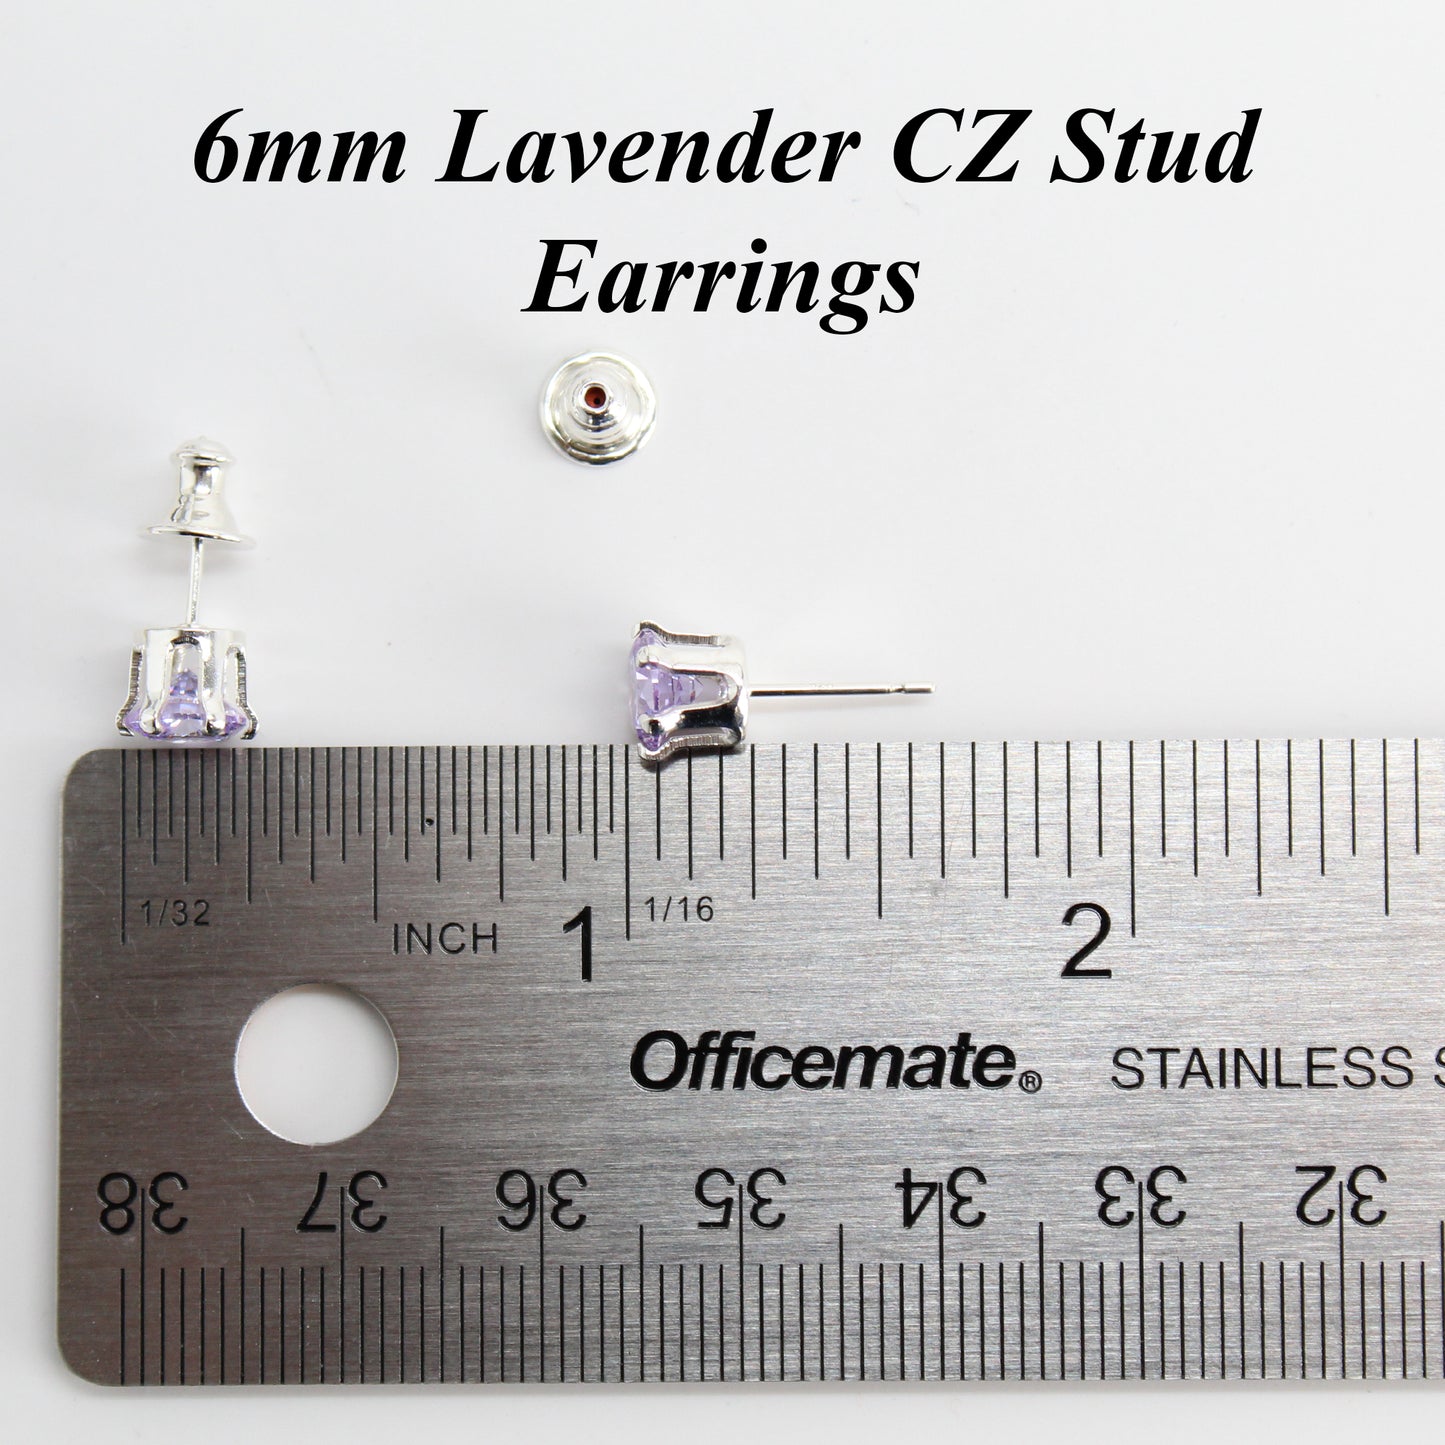 Load image into Gallery viewer, Lavender CZ Stud Earrings, 6mm Round Prong Set 925 Sterling Silver Pale Purple Studs
